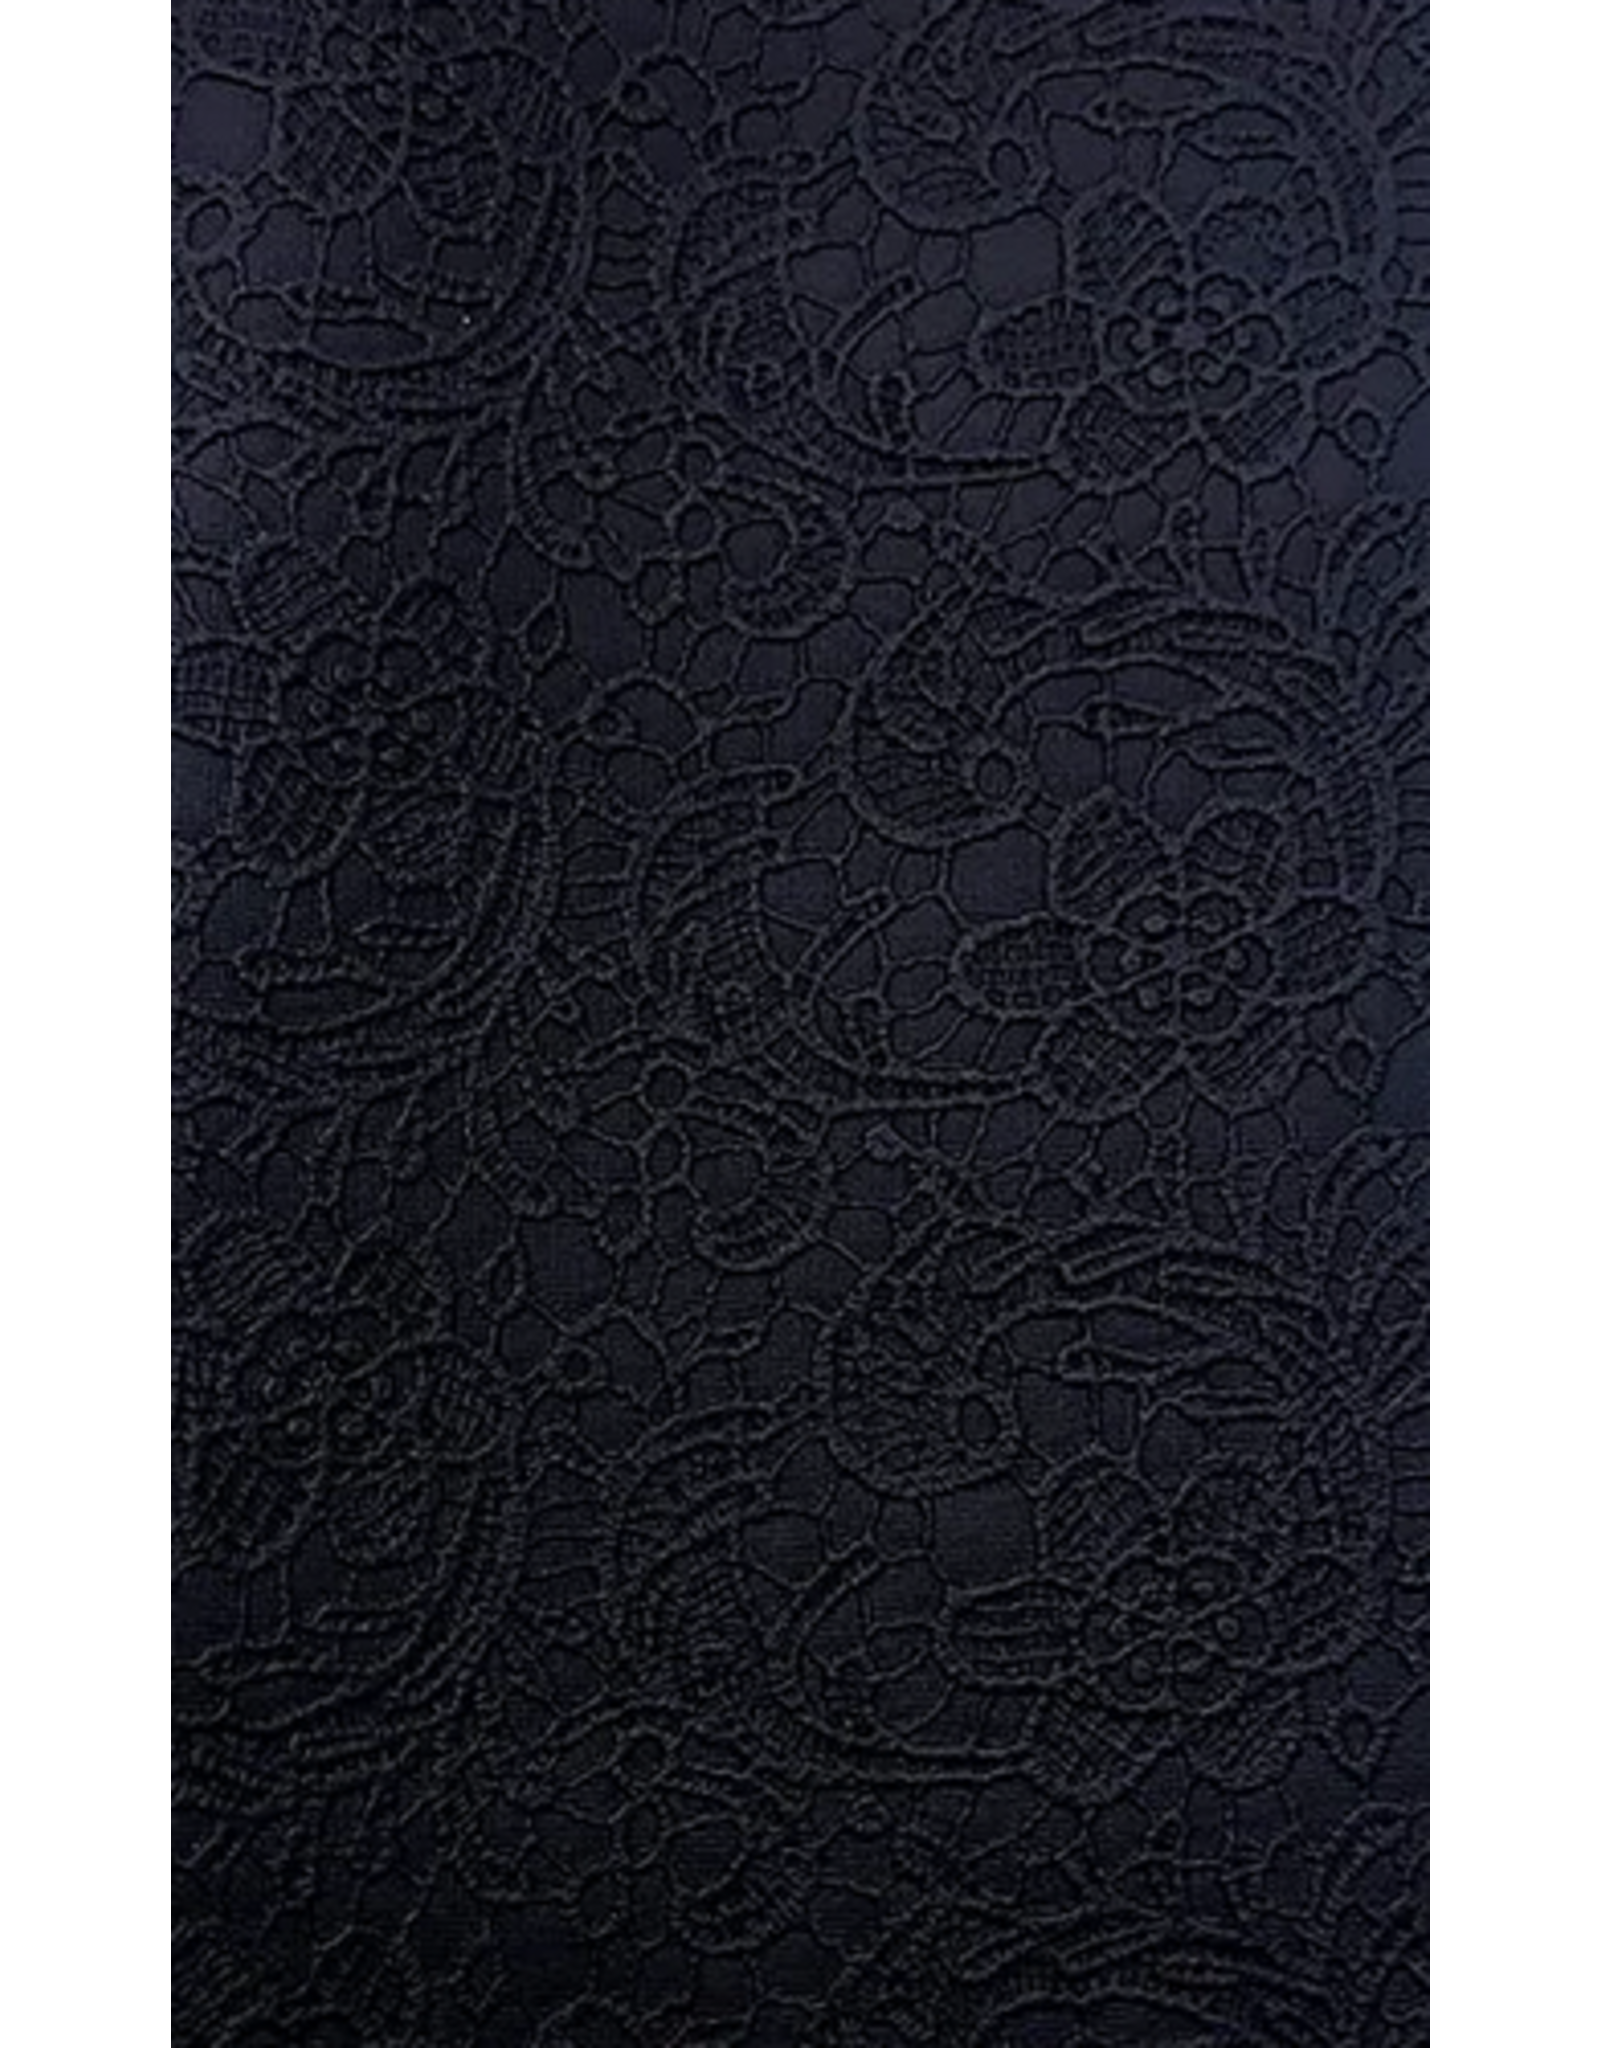 Faux Leather Beading Backing Black Lace Floral   .8mm thick 8x11"